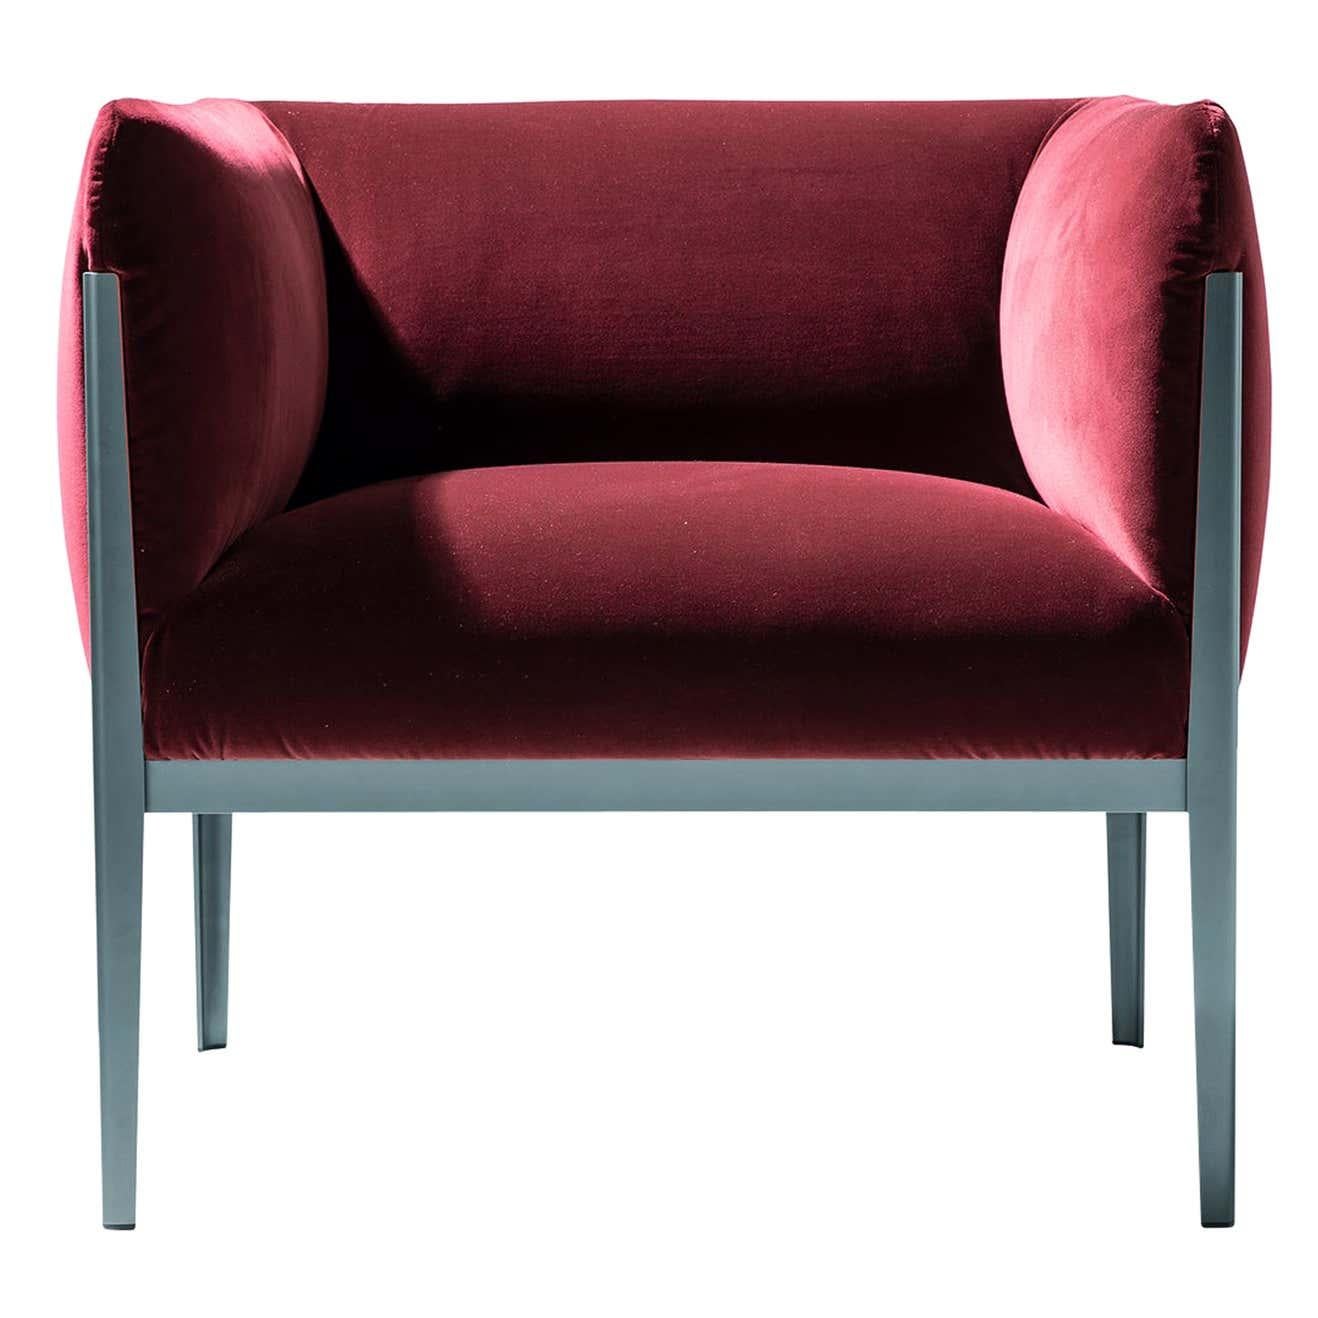 Contemporary Ronan & Erwan Bourroullec 'Cotone' Armchair, Aluminum and Fabric by Cassina For Sale